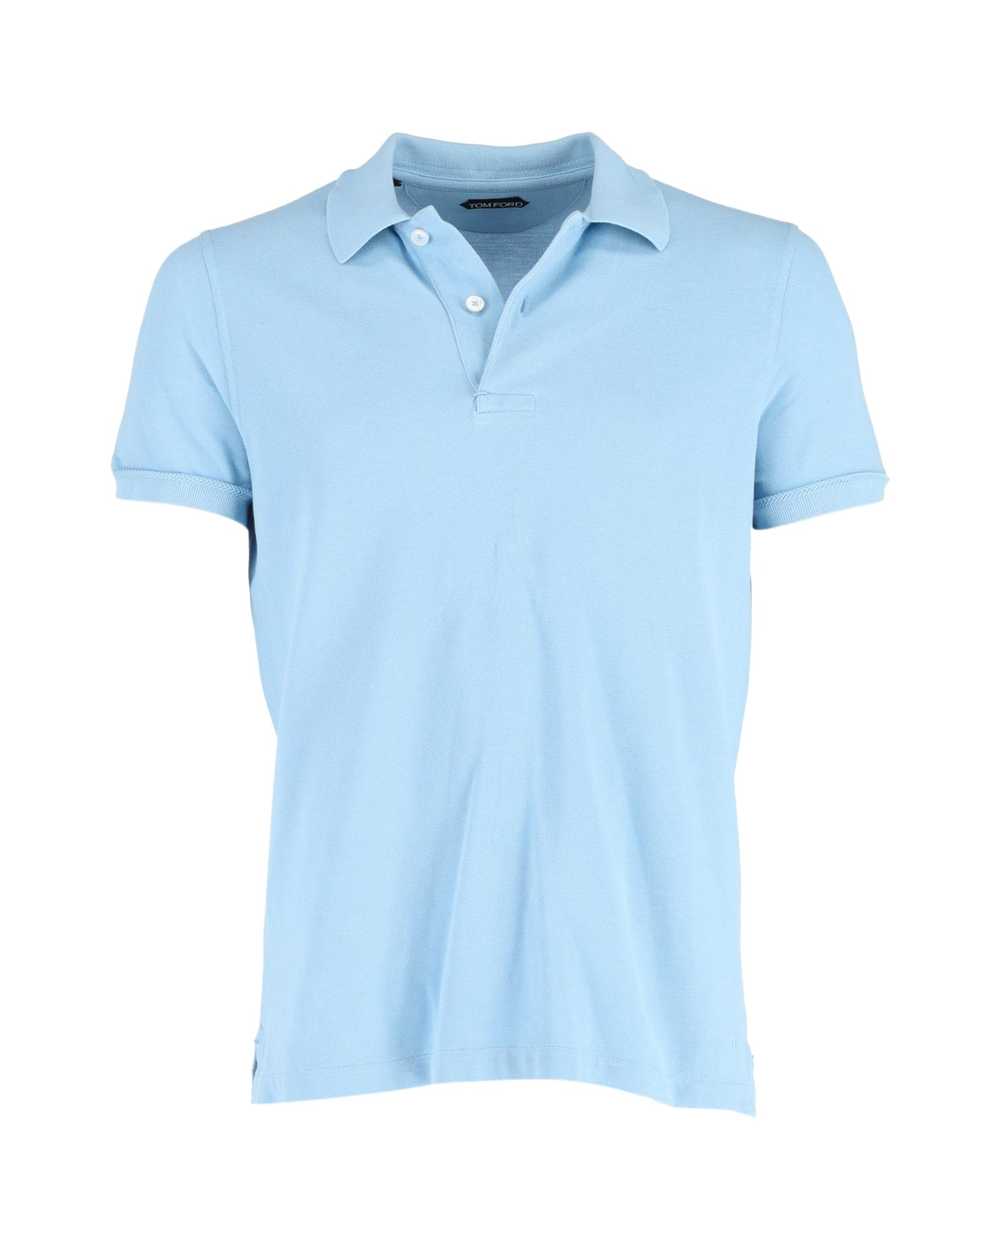 Product Details Tom Ford Blue Polo Shirt - image 2